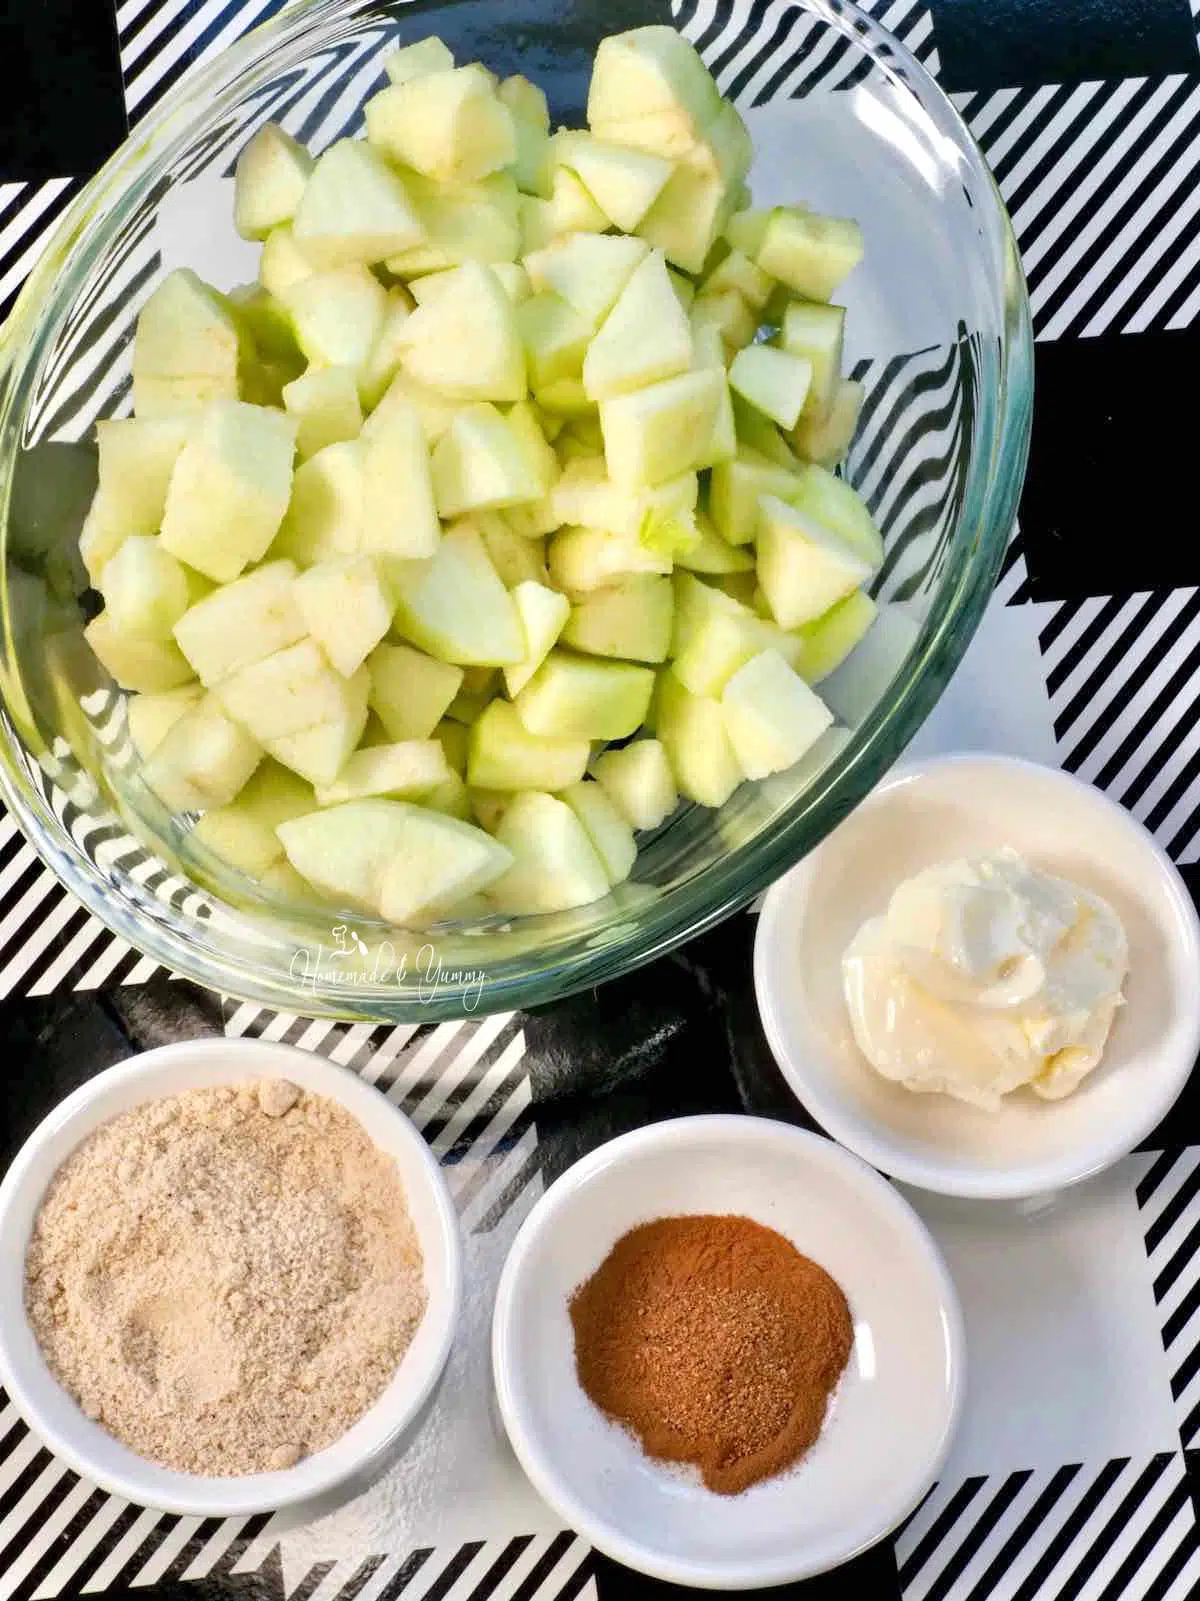 Ingredients for making this apple recipe.